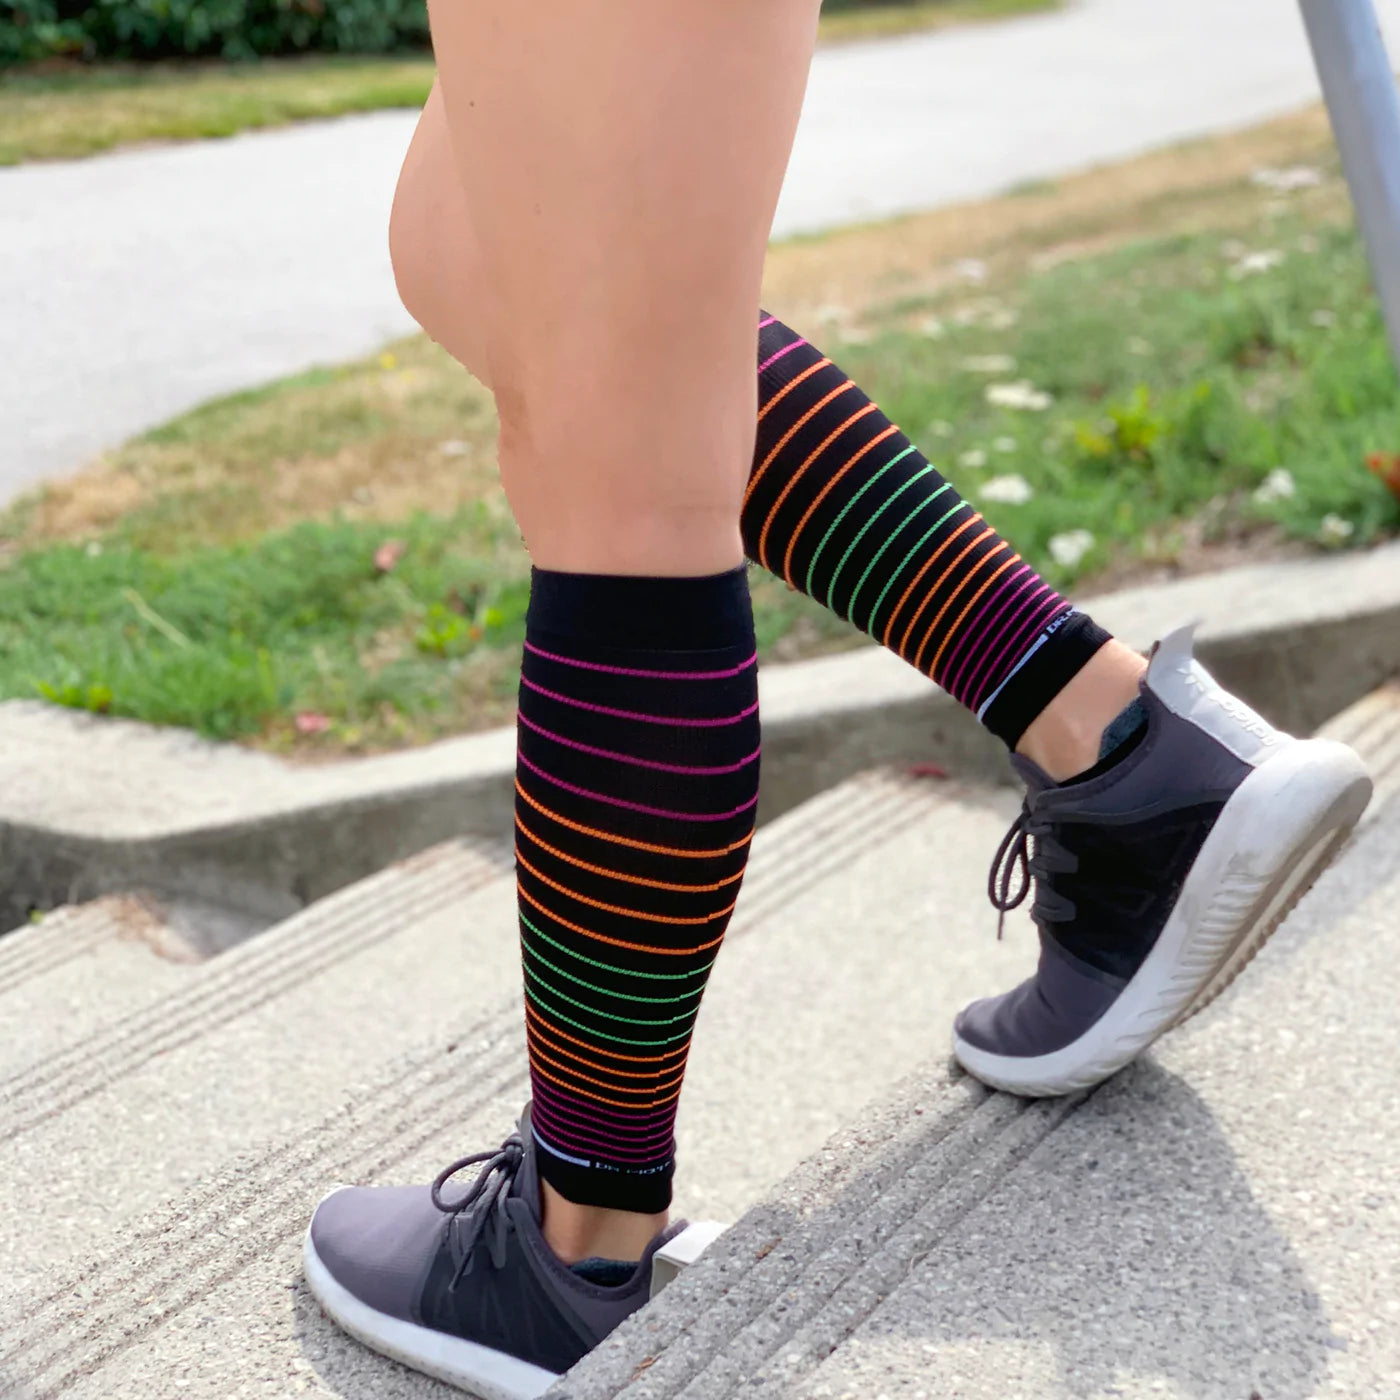 Compression Socks / Calf Sleeves for Running, Performance and